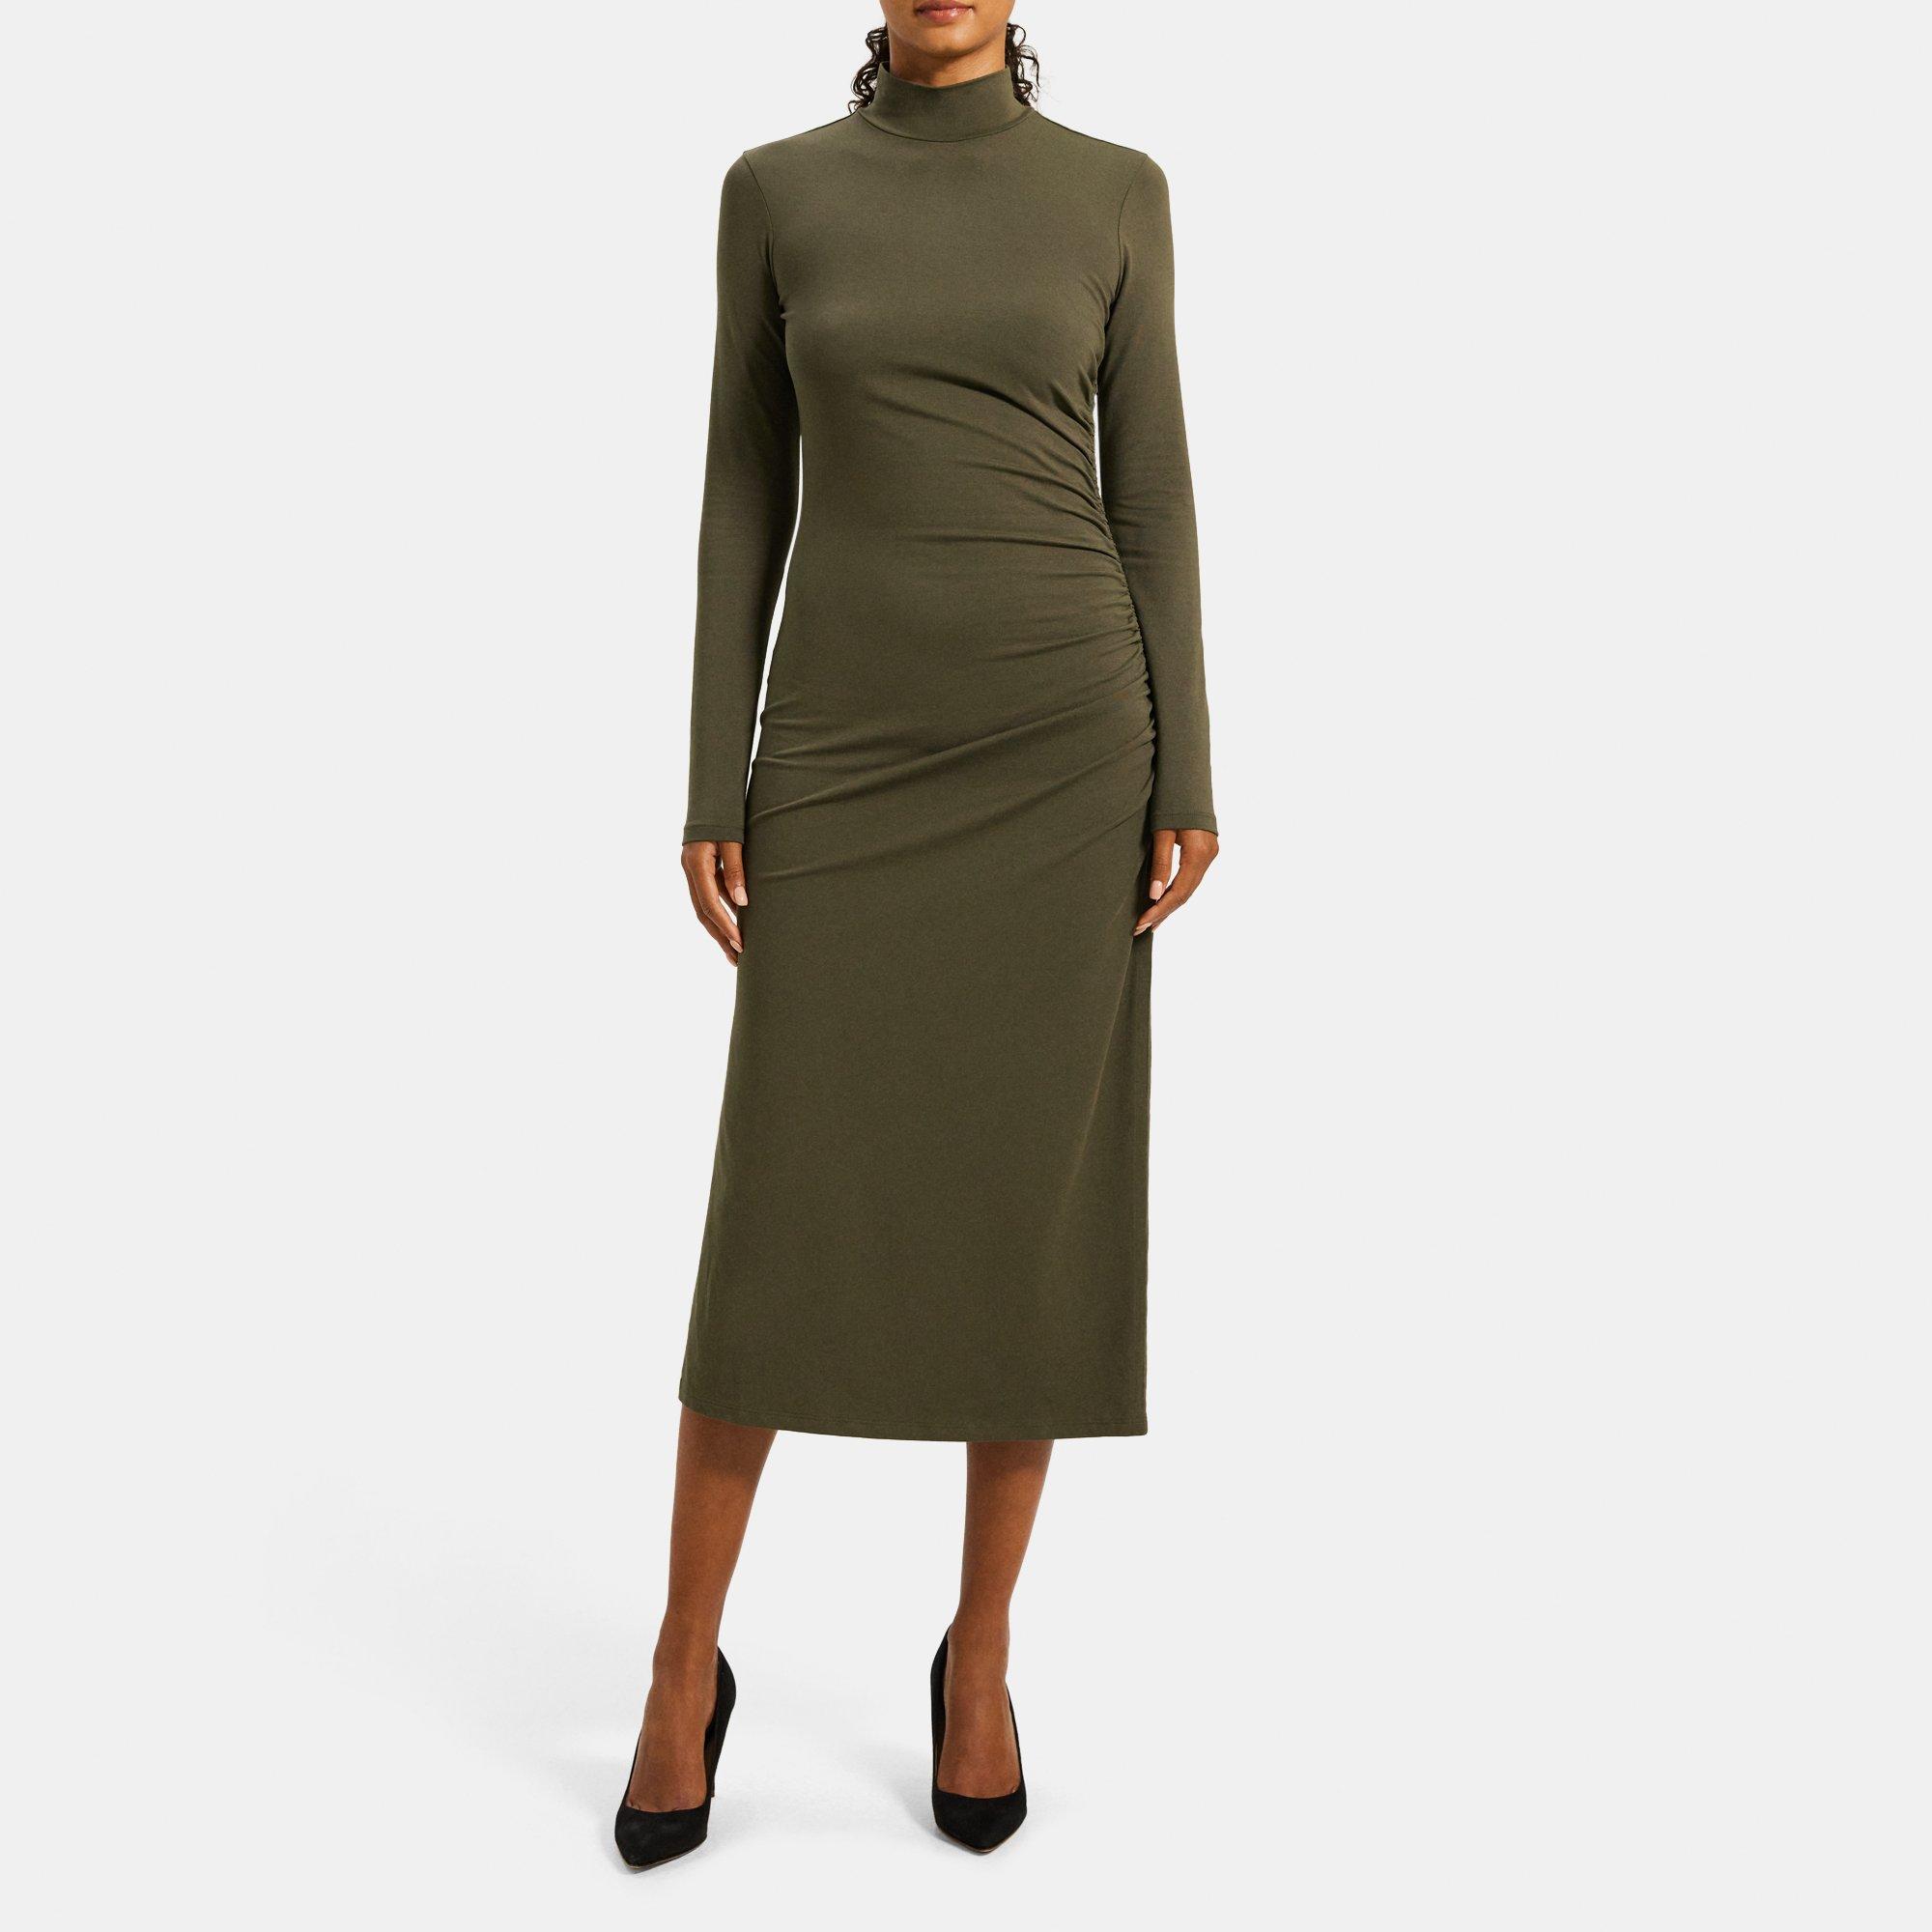 Theory Ruched Turtleneck Dress in Pima Cotton Jersey